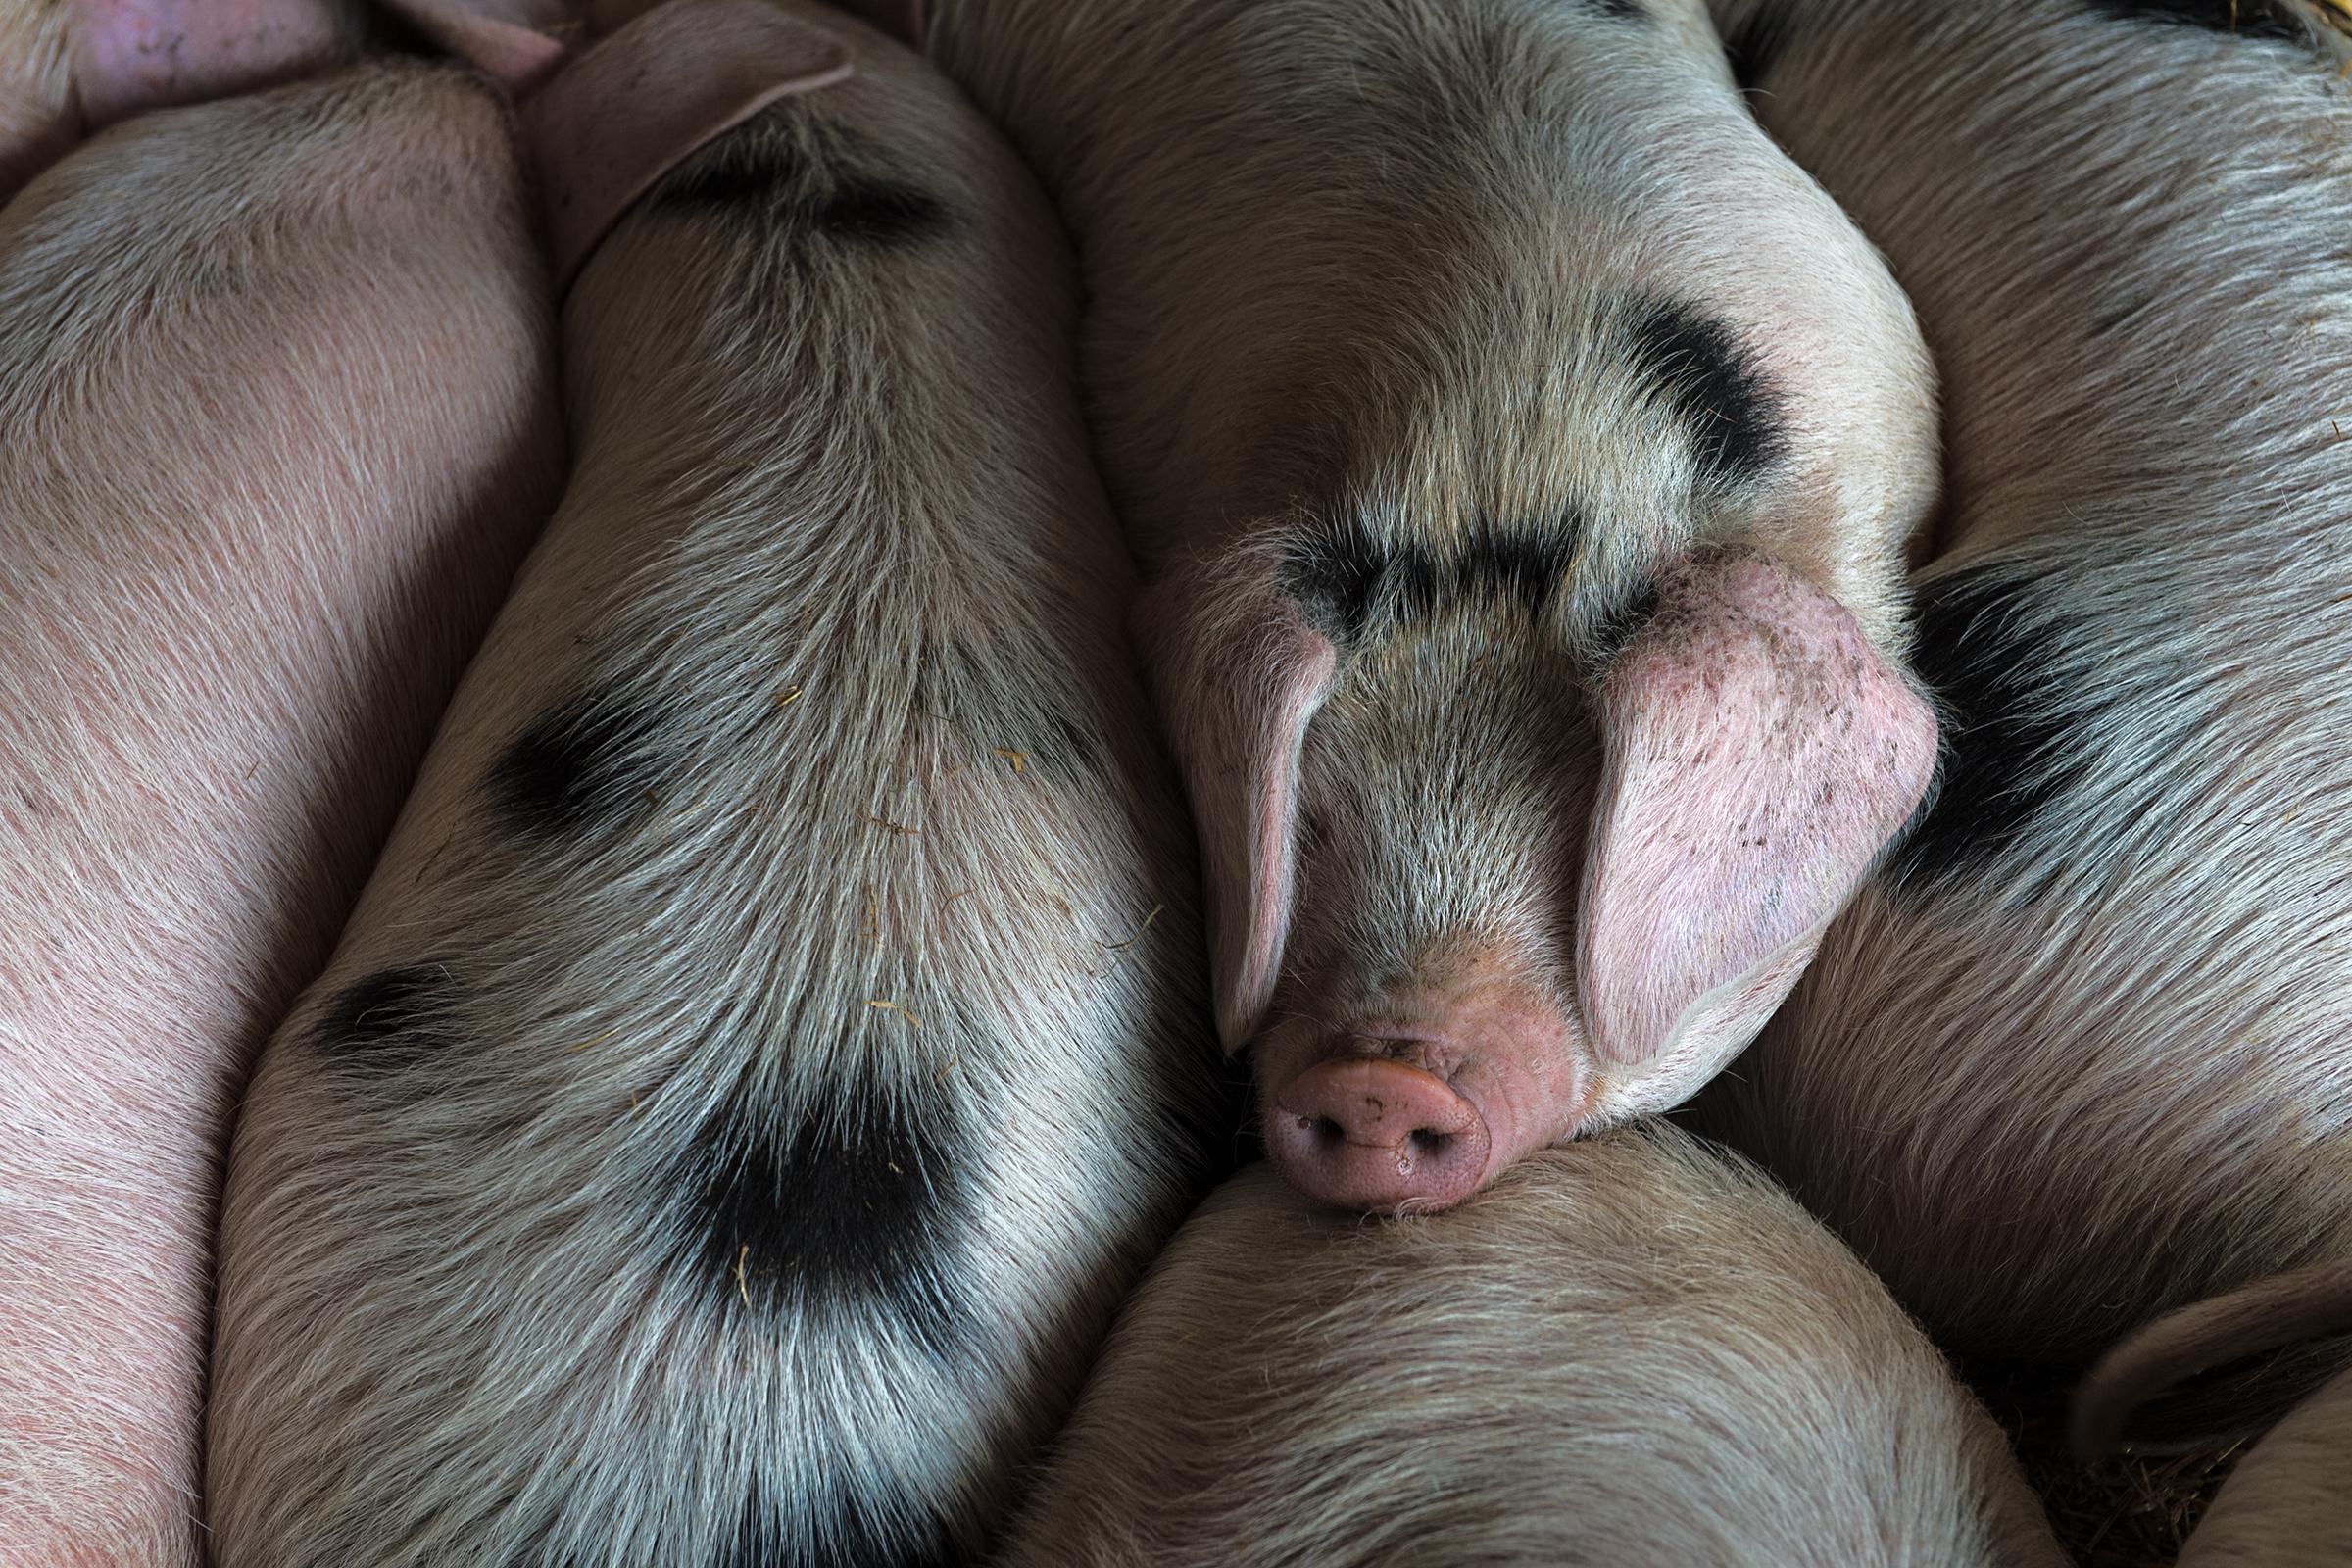 Considered - Baby pigs are allowed to nurse with their mother, and...